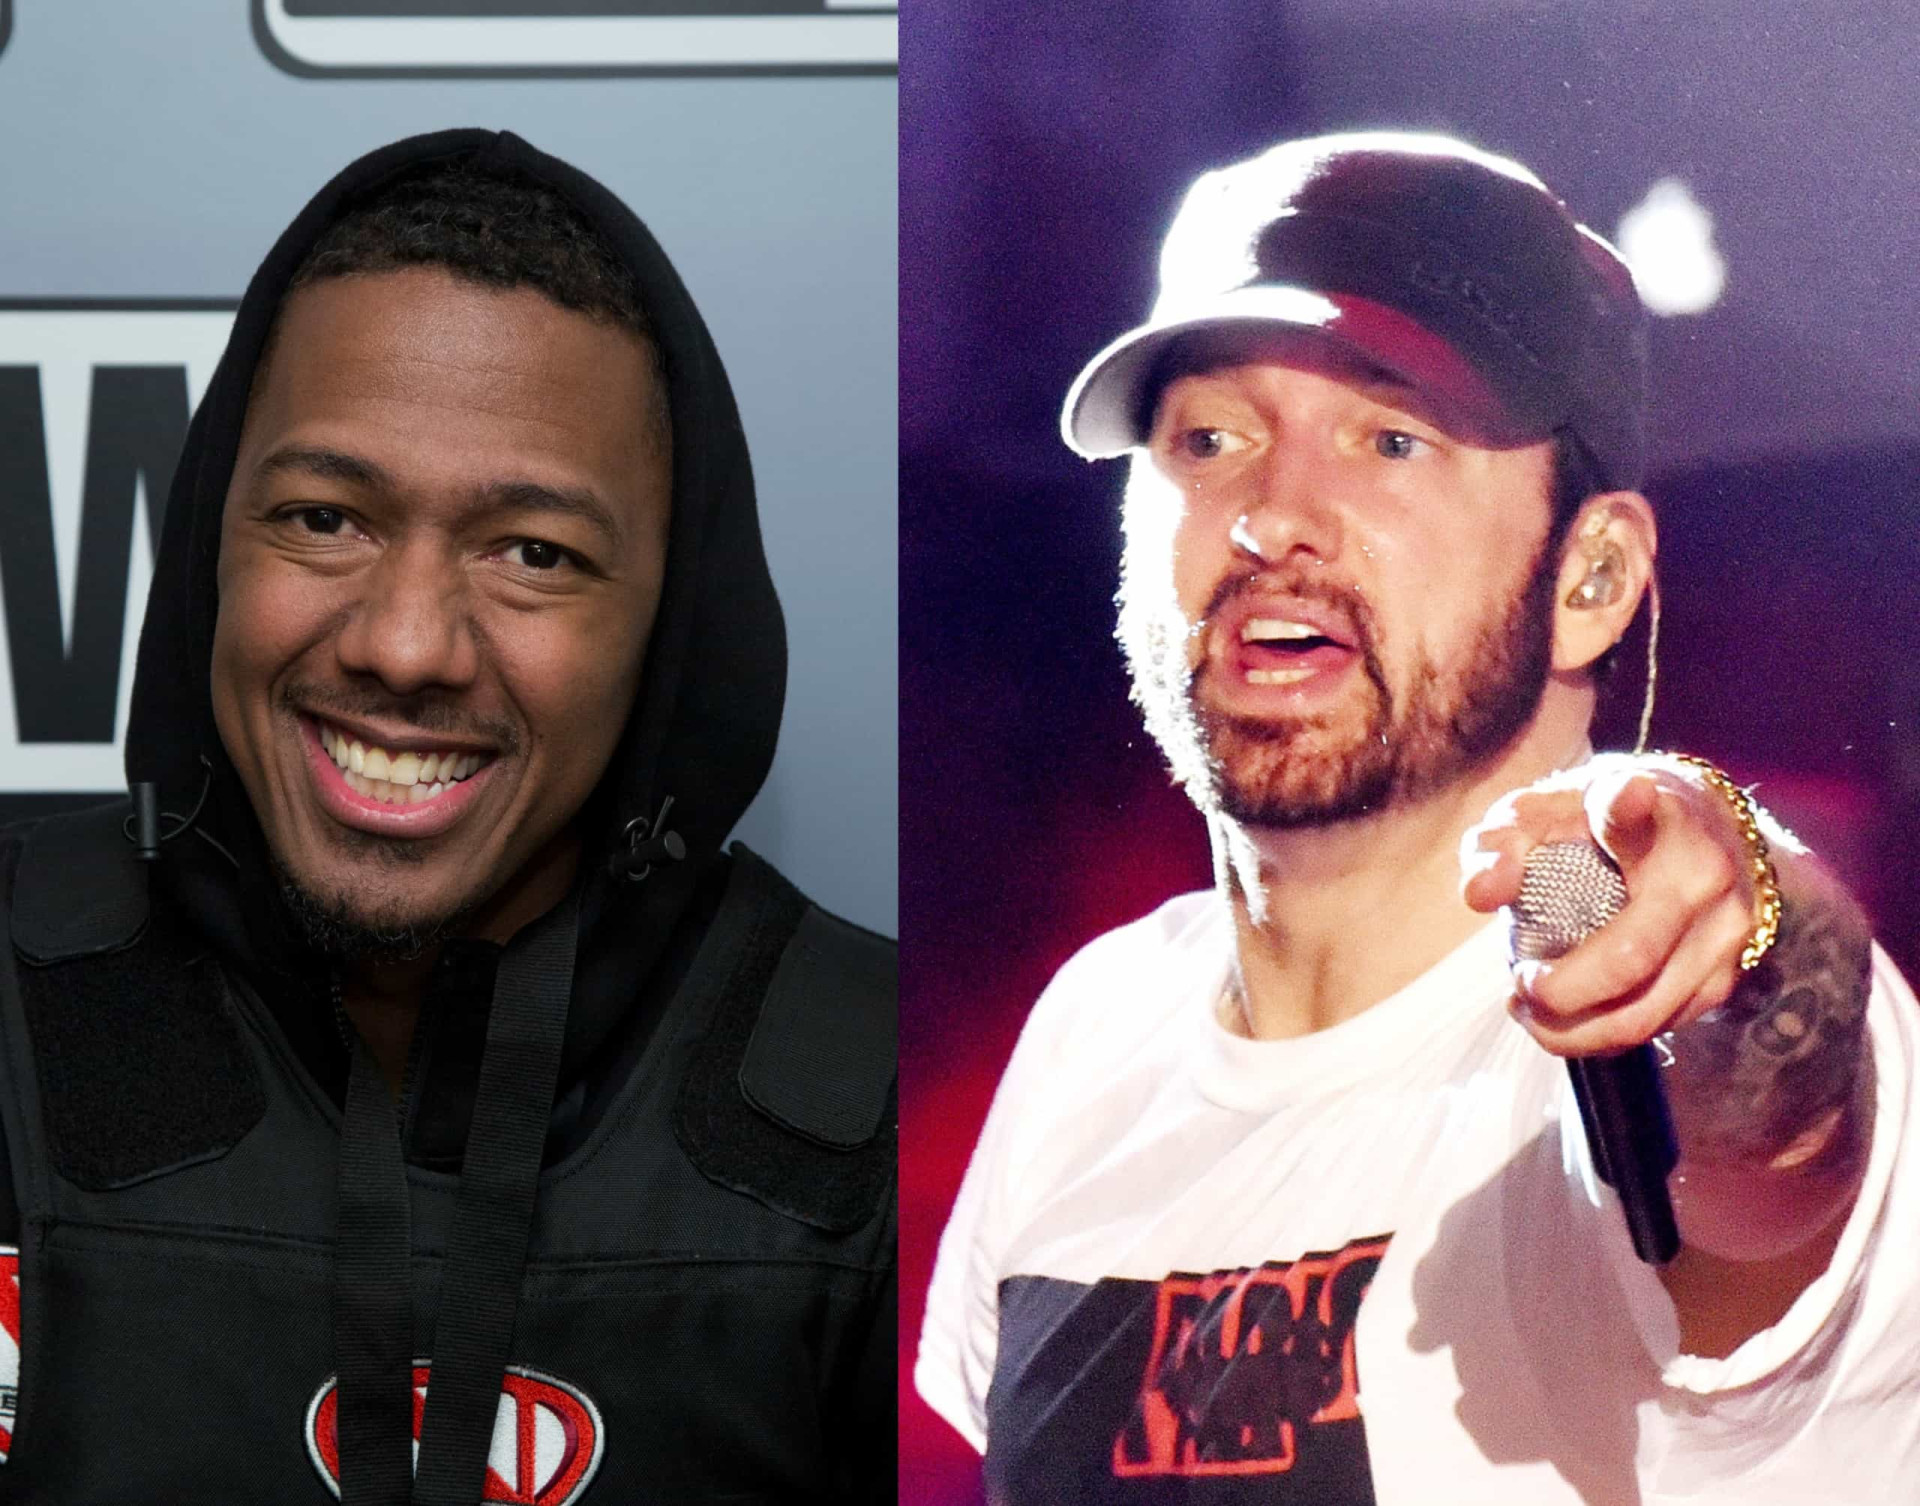 <p>Nick Cannon and Eminem have had ongoing issues since 2009. The conflict began when Cannon defended his ex-wife Mariah Carey against Eminem's allegations that they had dated. Ten years later, on December 5, 2019, Fat Joe released 'Lord Above,' a song featuring Eminem, who mentioned Carey and Cannon. In response, Cannon released a diss track called 'The Invitation.' The feud has since spilled over onto Twitter, with both artists continuing to criticize each other.</p><p><a href="https://www.msn.com/en-us/community/channel/vid-7xx8mnucu55yw63we9va2gwr7uihbxwc68fxqp25x6tg4ftibpra?cvid=94631541bc0f4f89bfd59158d696ad7e">Follow us and access great exclusive content every day</a></p>